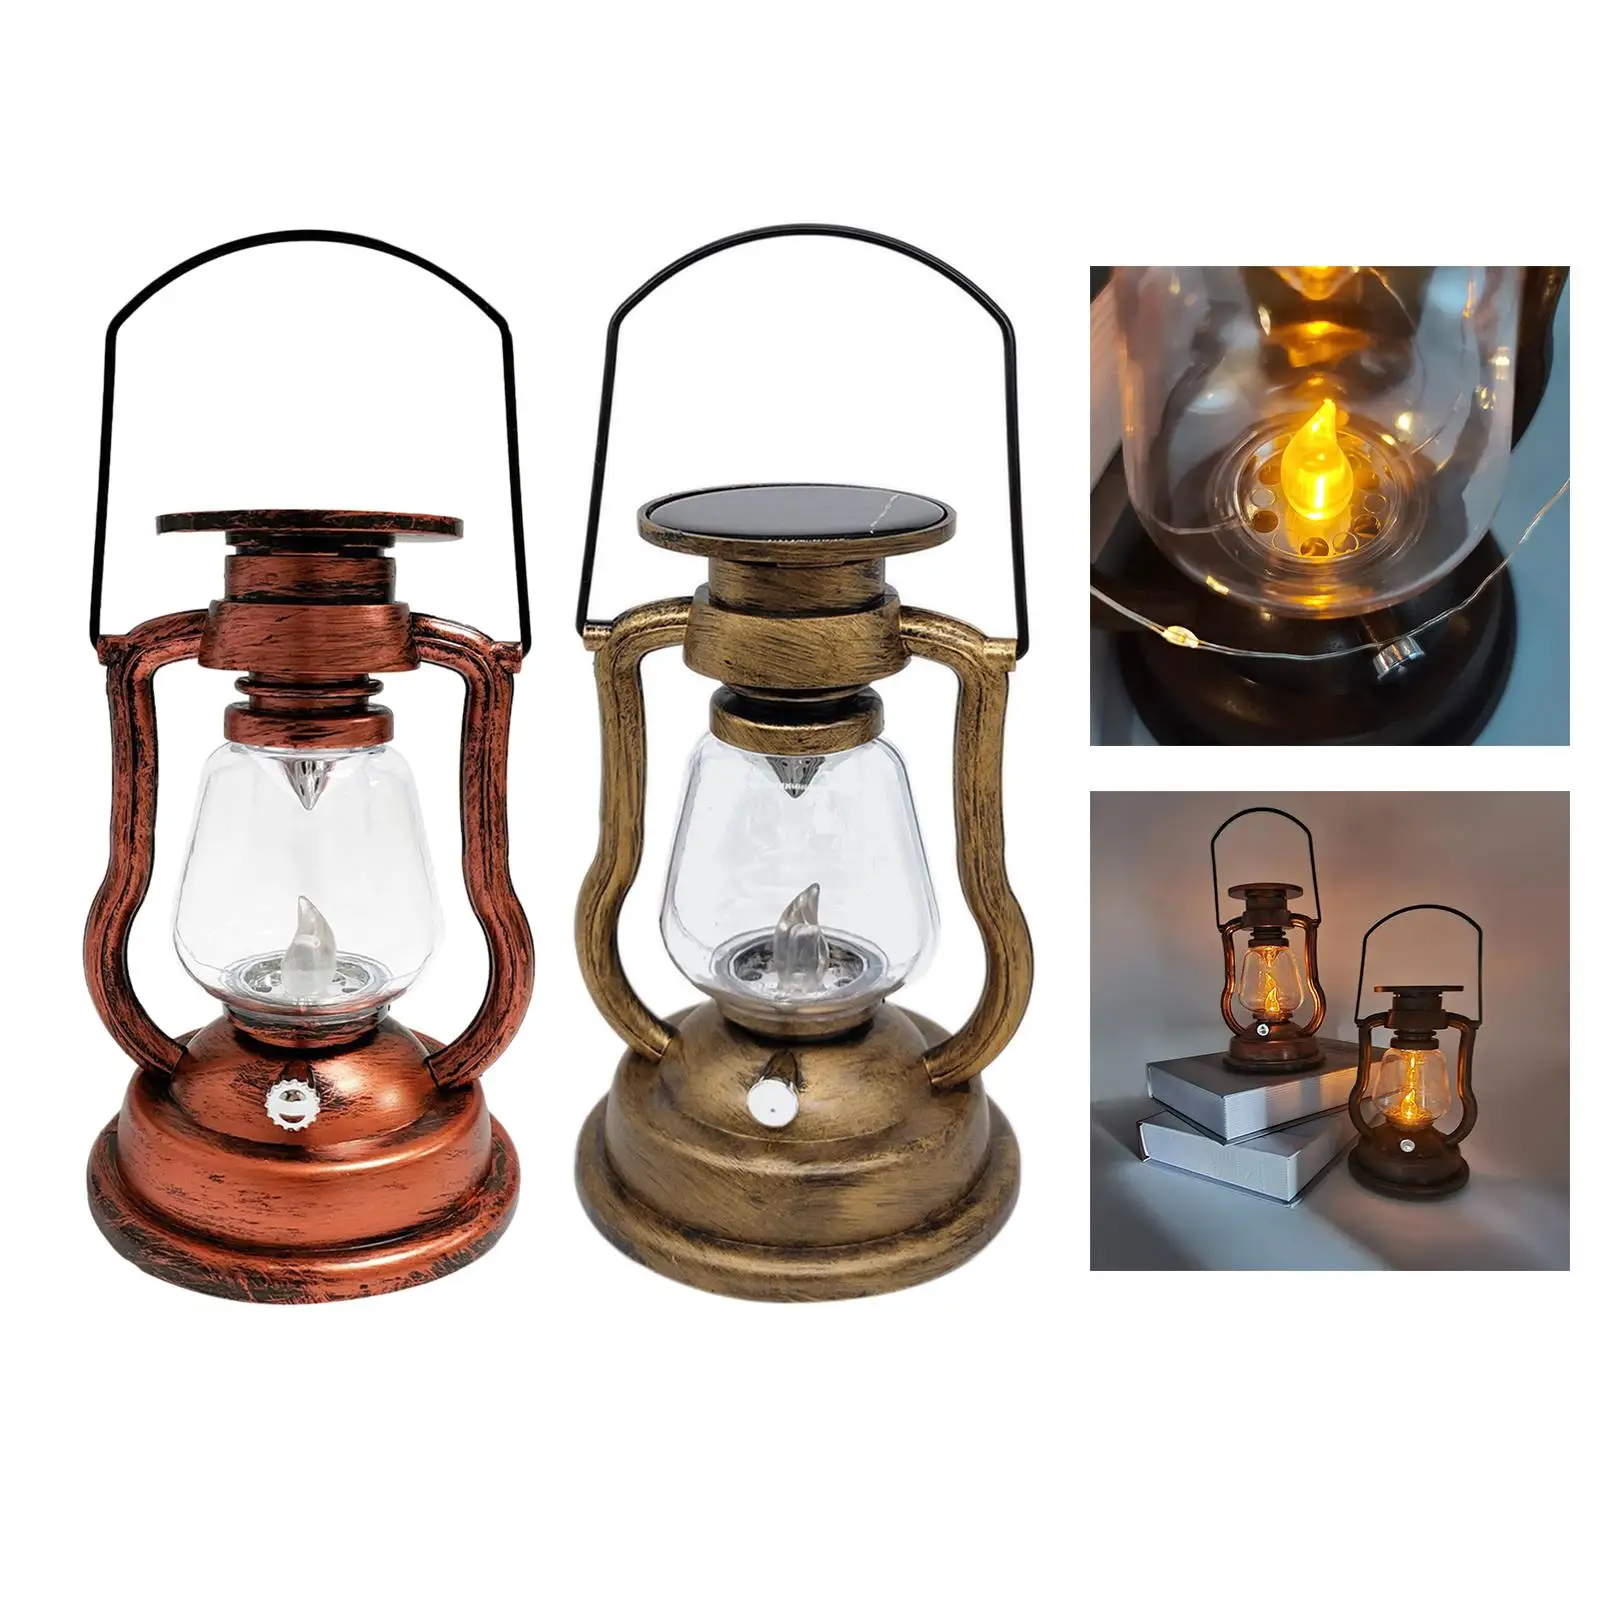 LED Camping Lanterns Solar Powered Lighting Fishing Handheld or Hanging Retro Style Tent Light Camping Lamp for Fence Path Decor